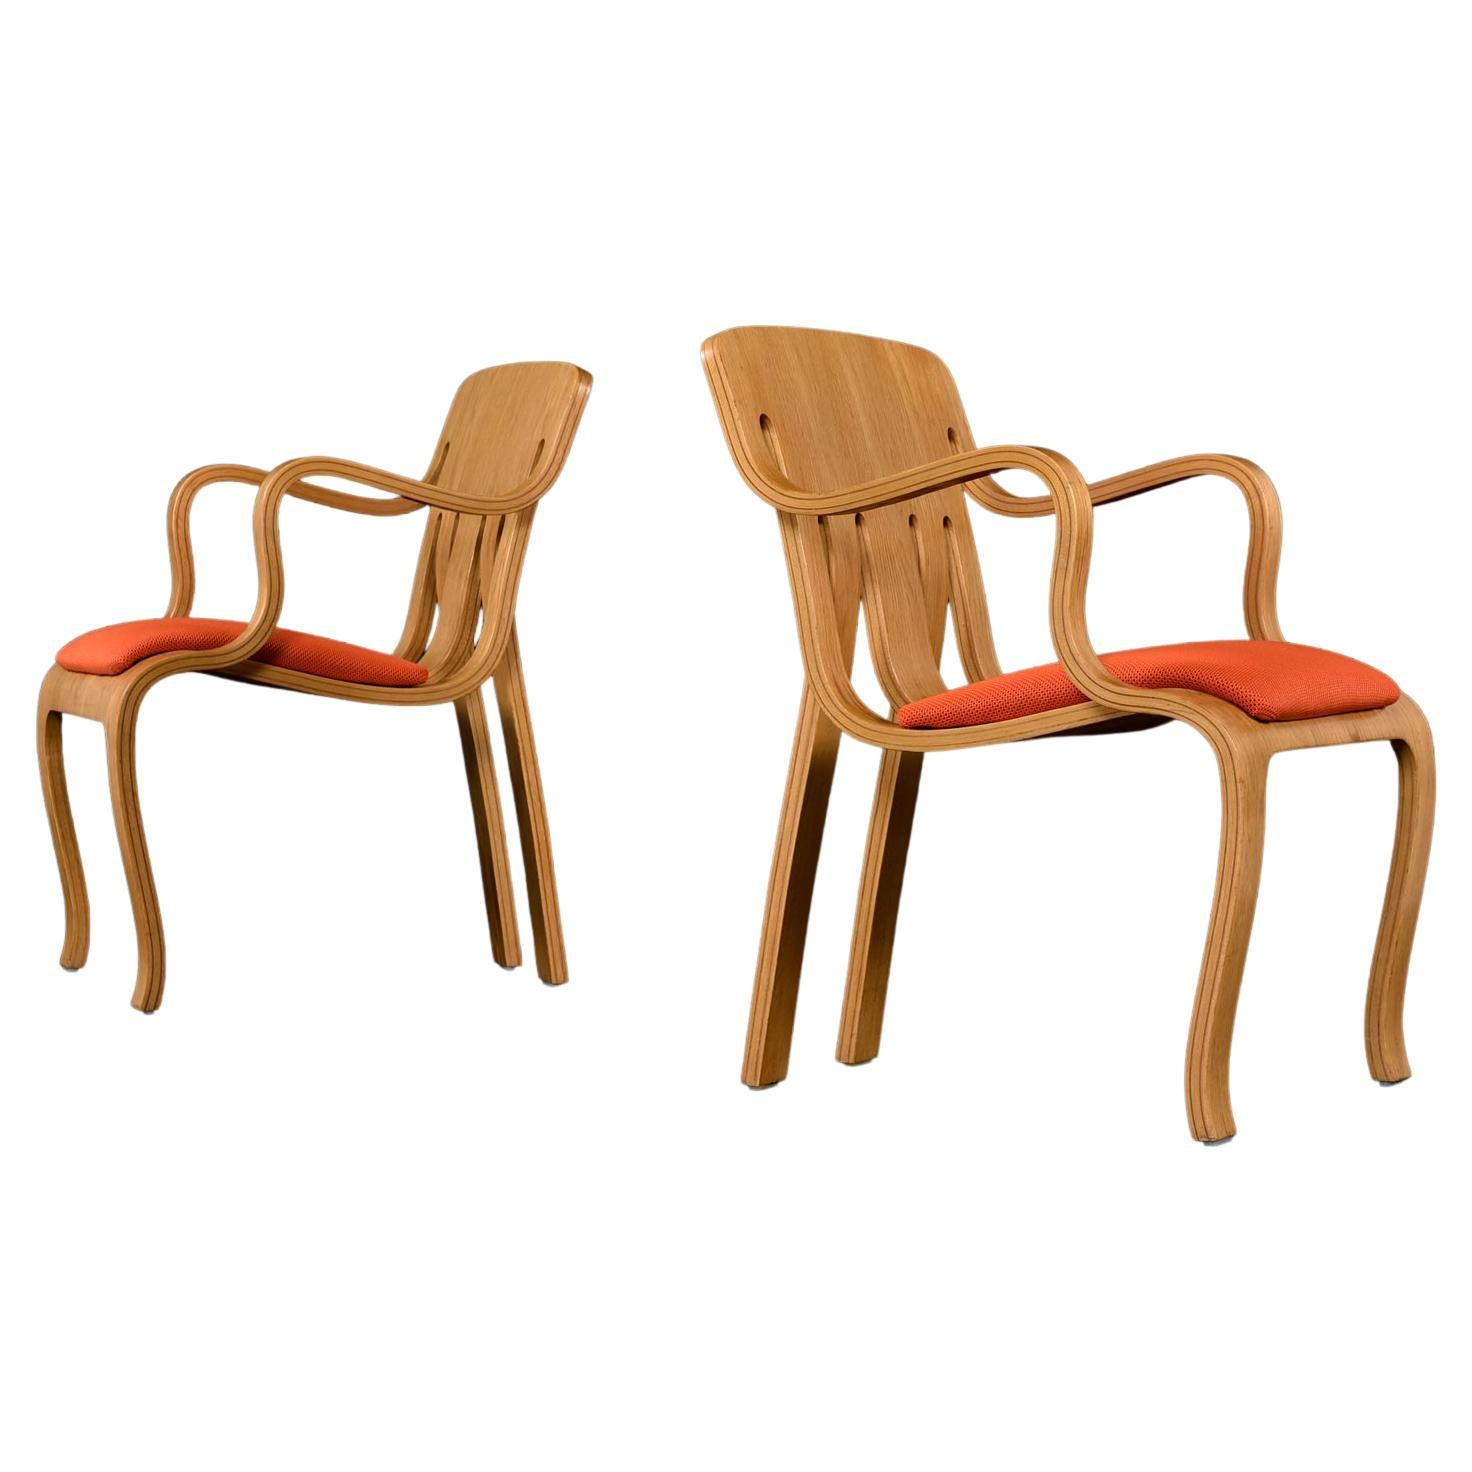 1978 Molded Plywood Armchair Set of 2 in Oak by Peter Danko for Thonet